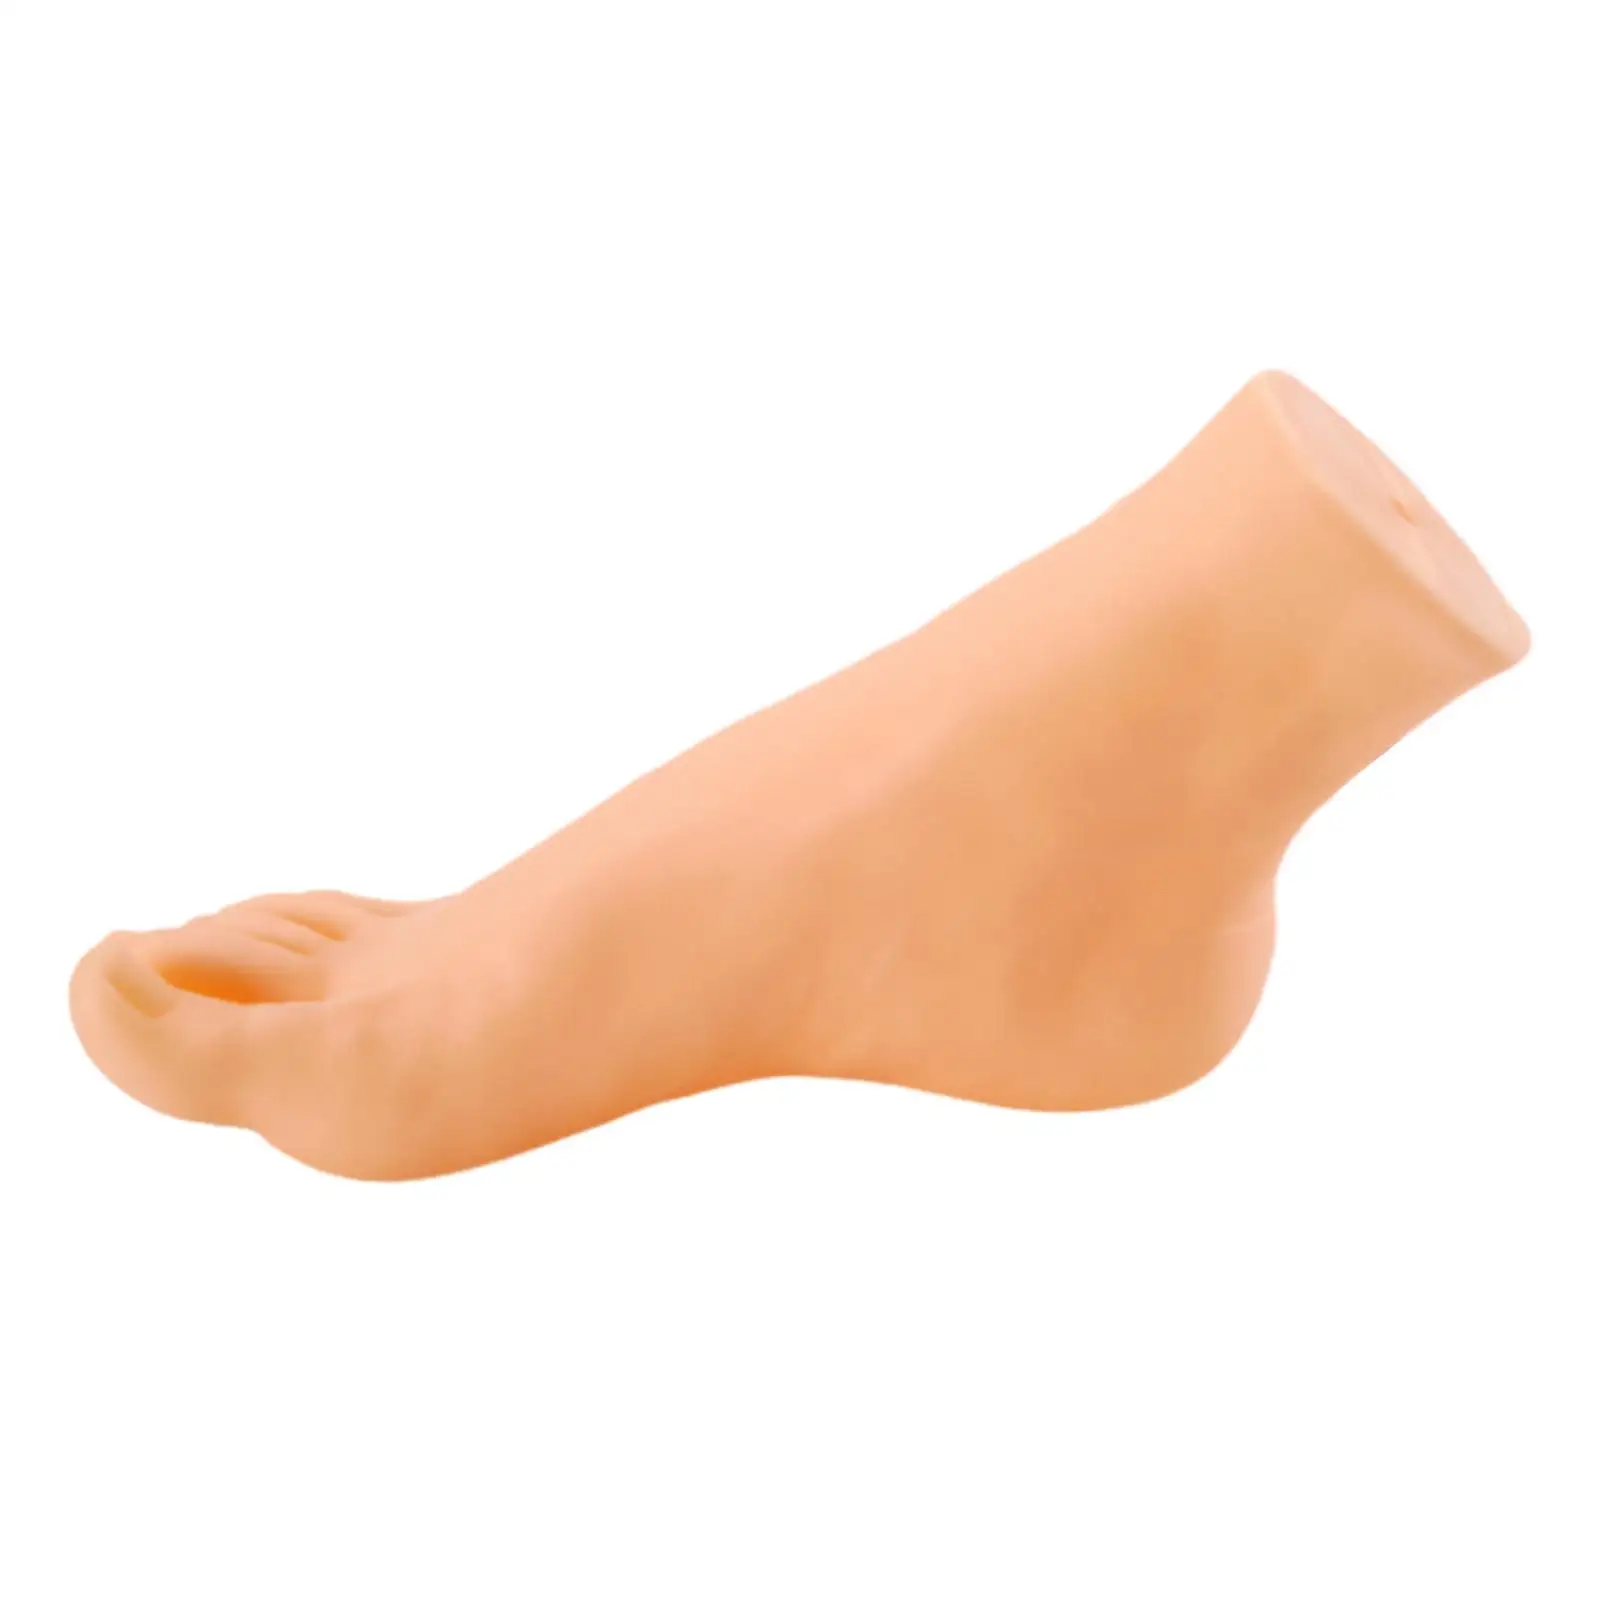 Foot Model Stand Tools Sock Display Prop Mannequin Foot Display Ankle Bracelet Shoes Sock Display for Retail Shop Chains